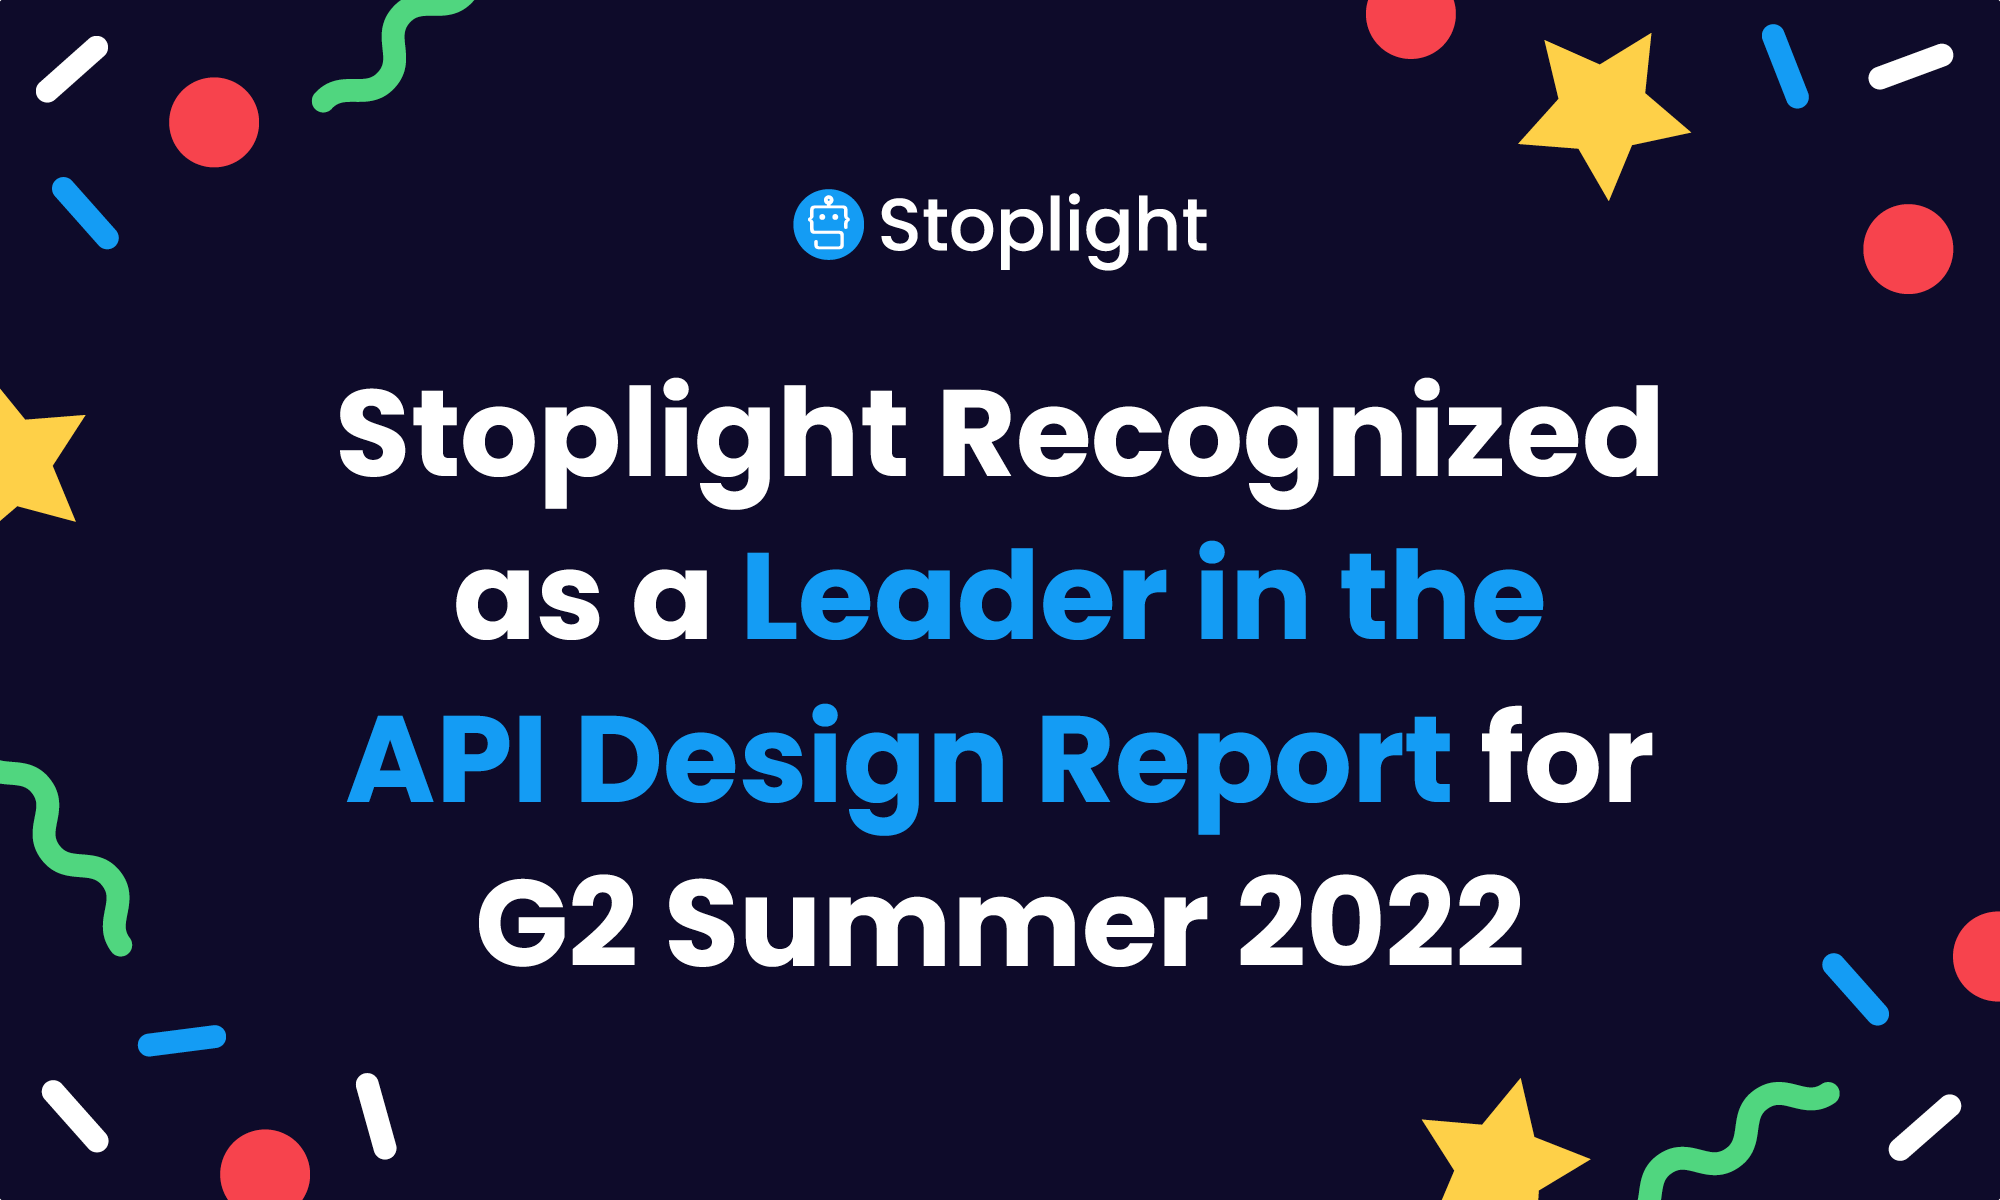 Stoplight Recognized as a Leader for G2 Summer 2022